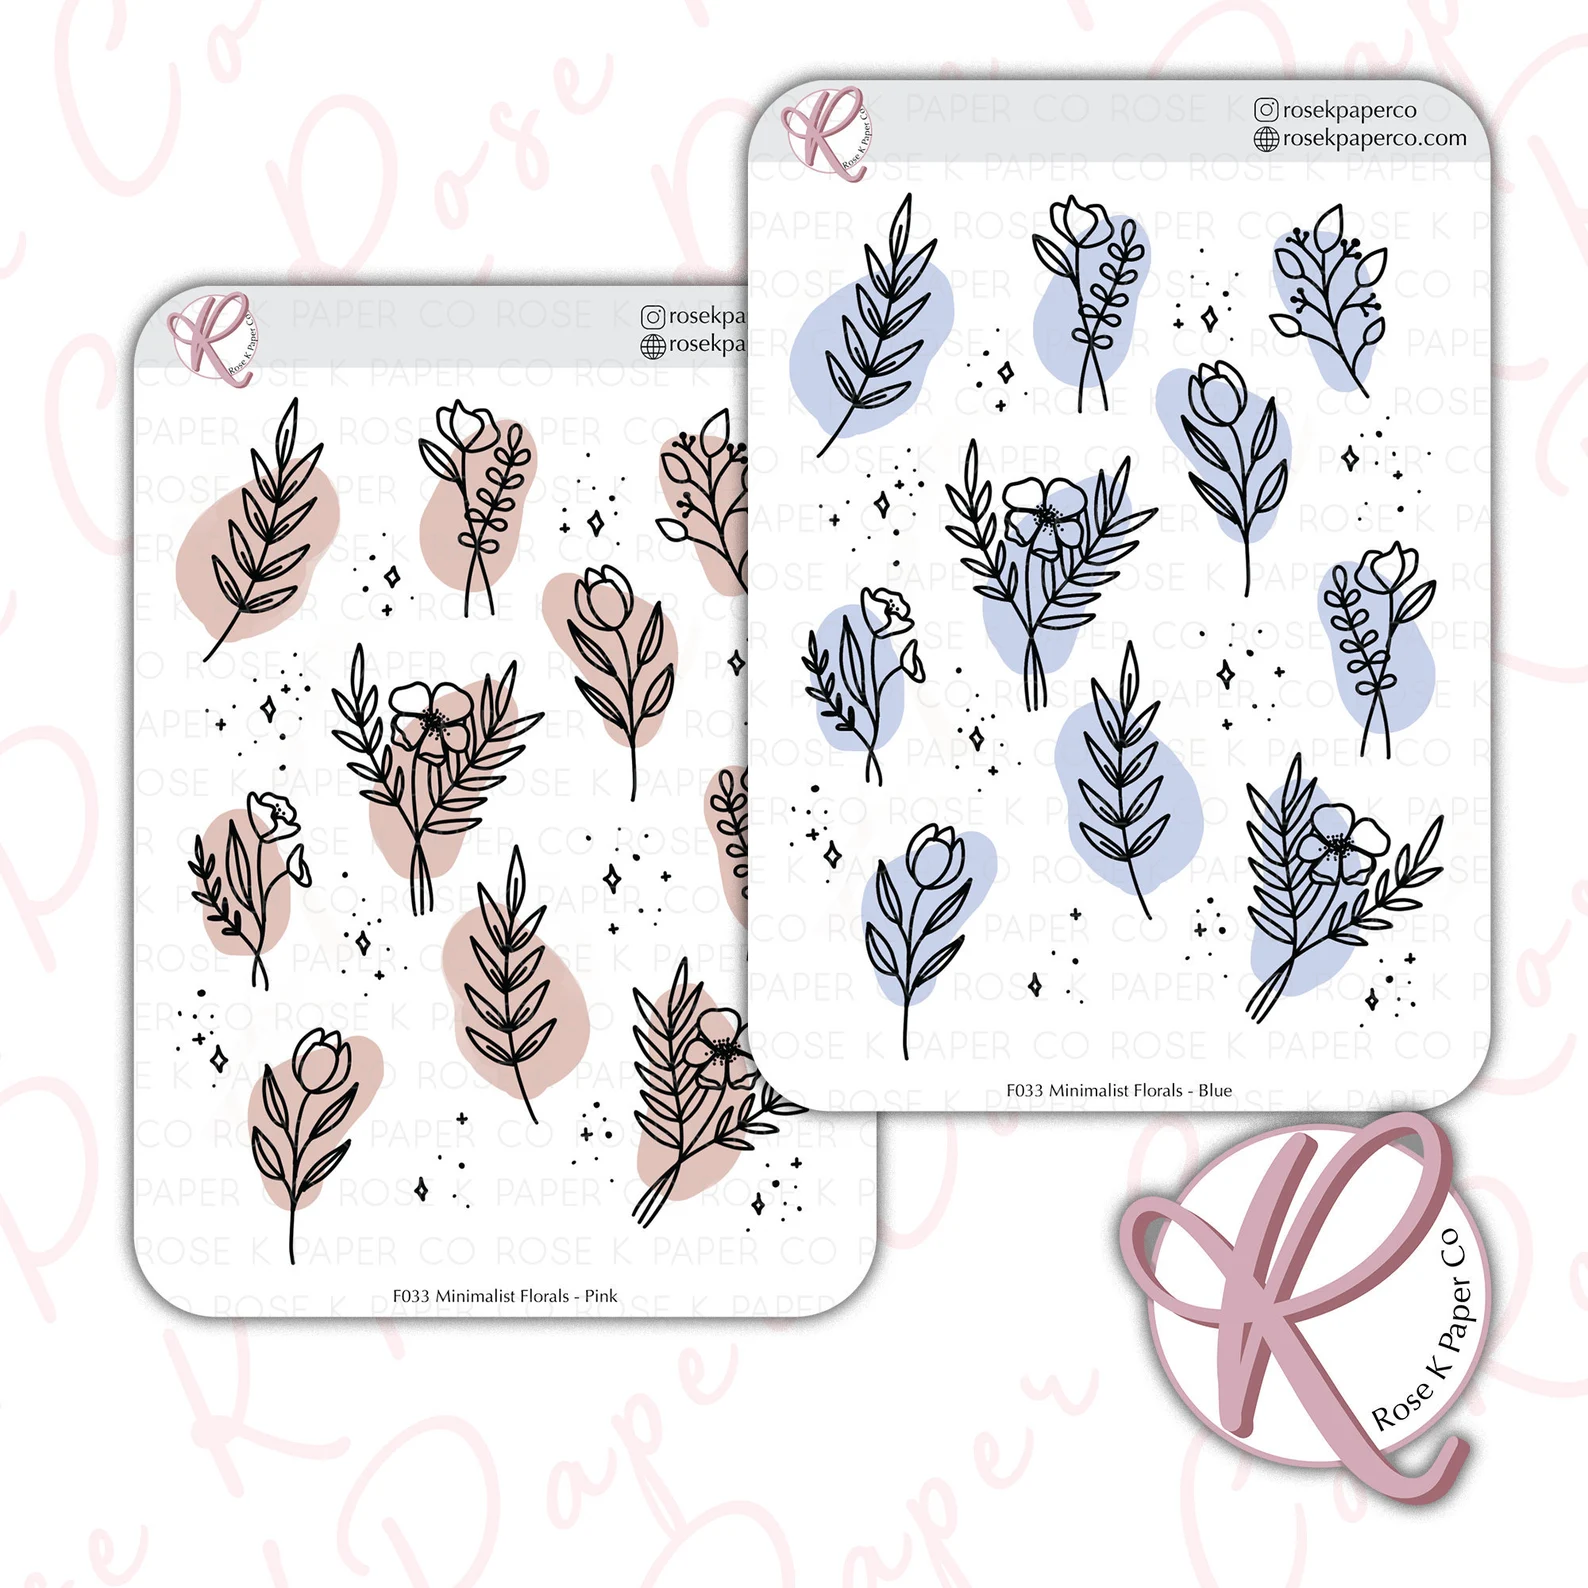 Journal Junkies Rose K Paper Co Decorative Stickers | Minimal Floral Stickers Cover